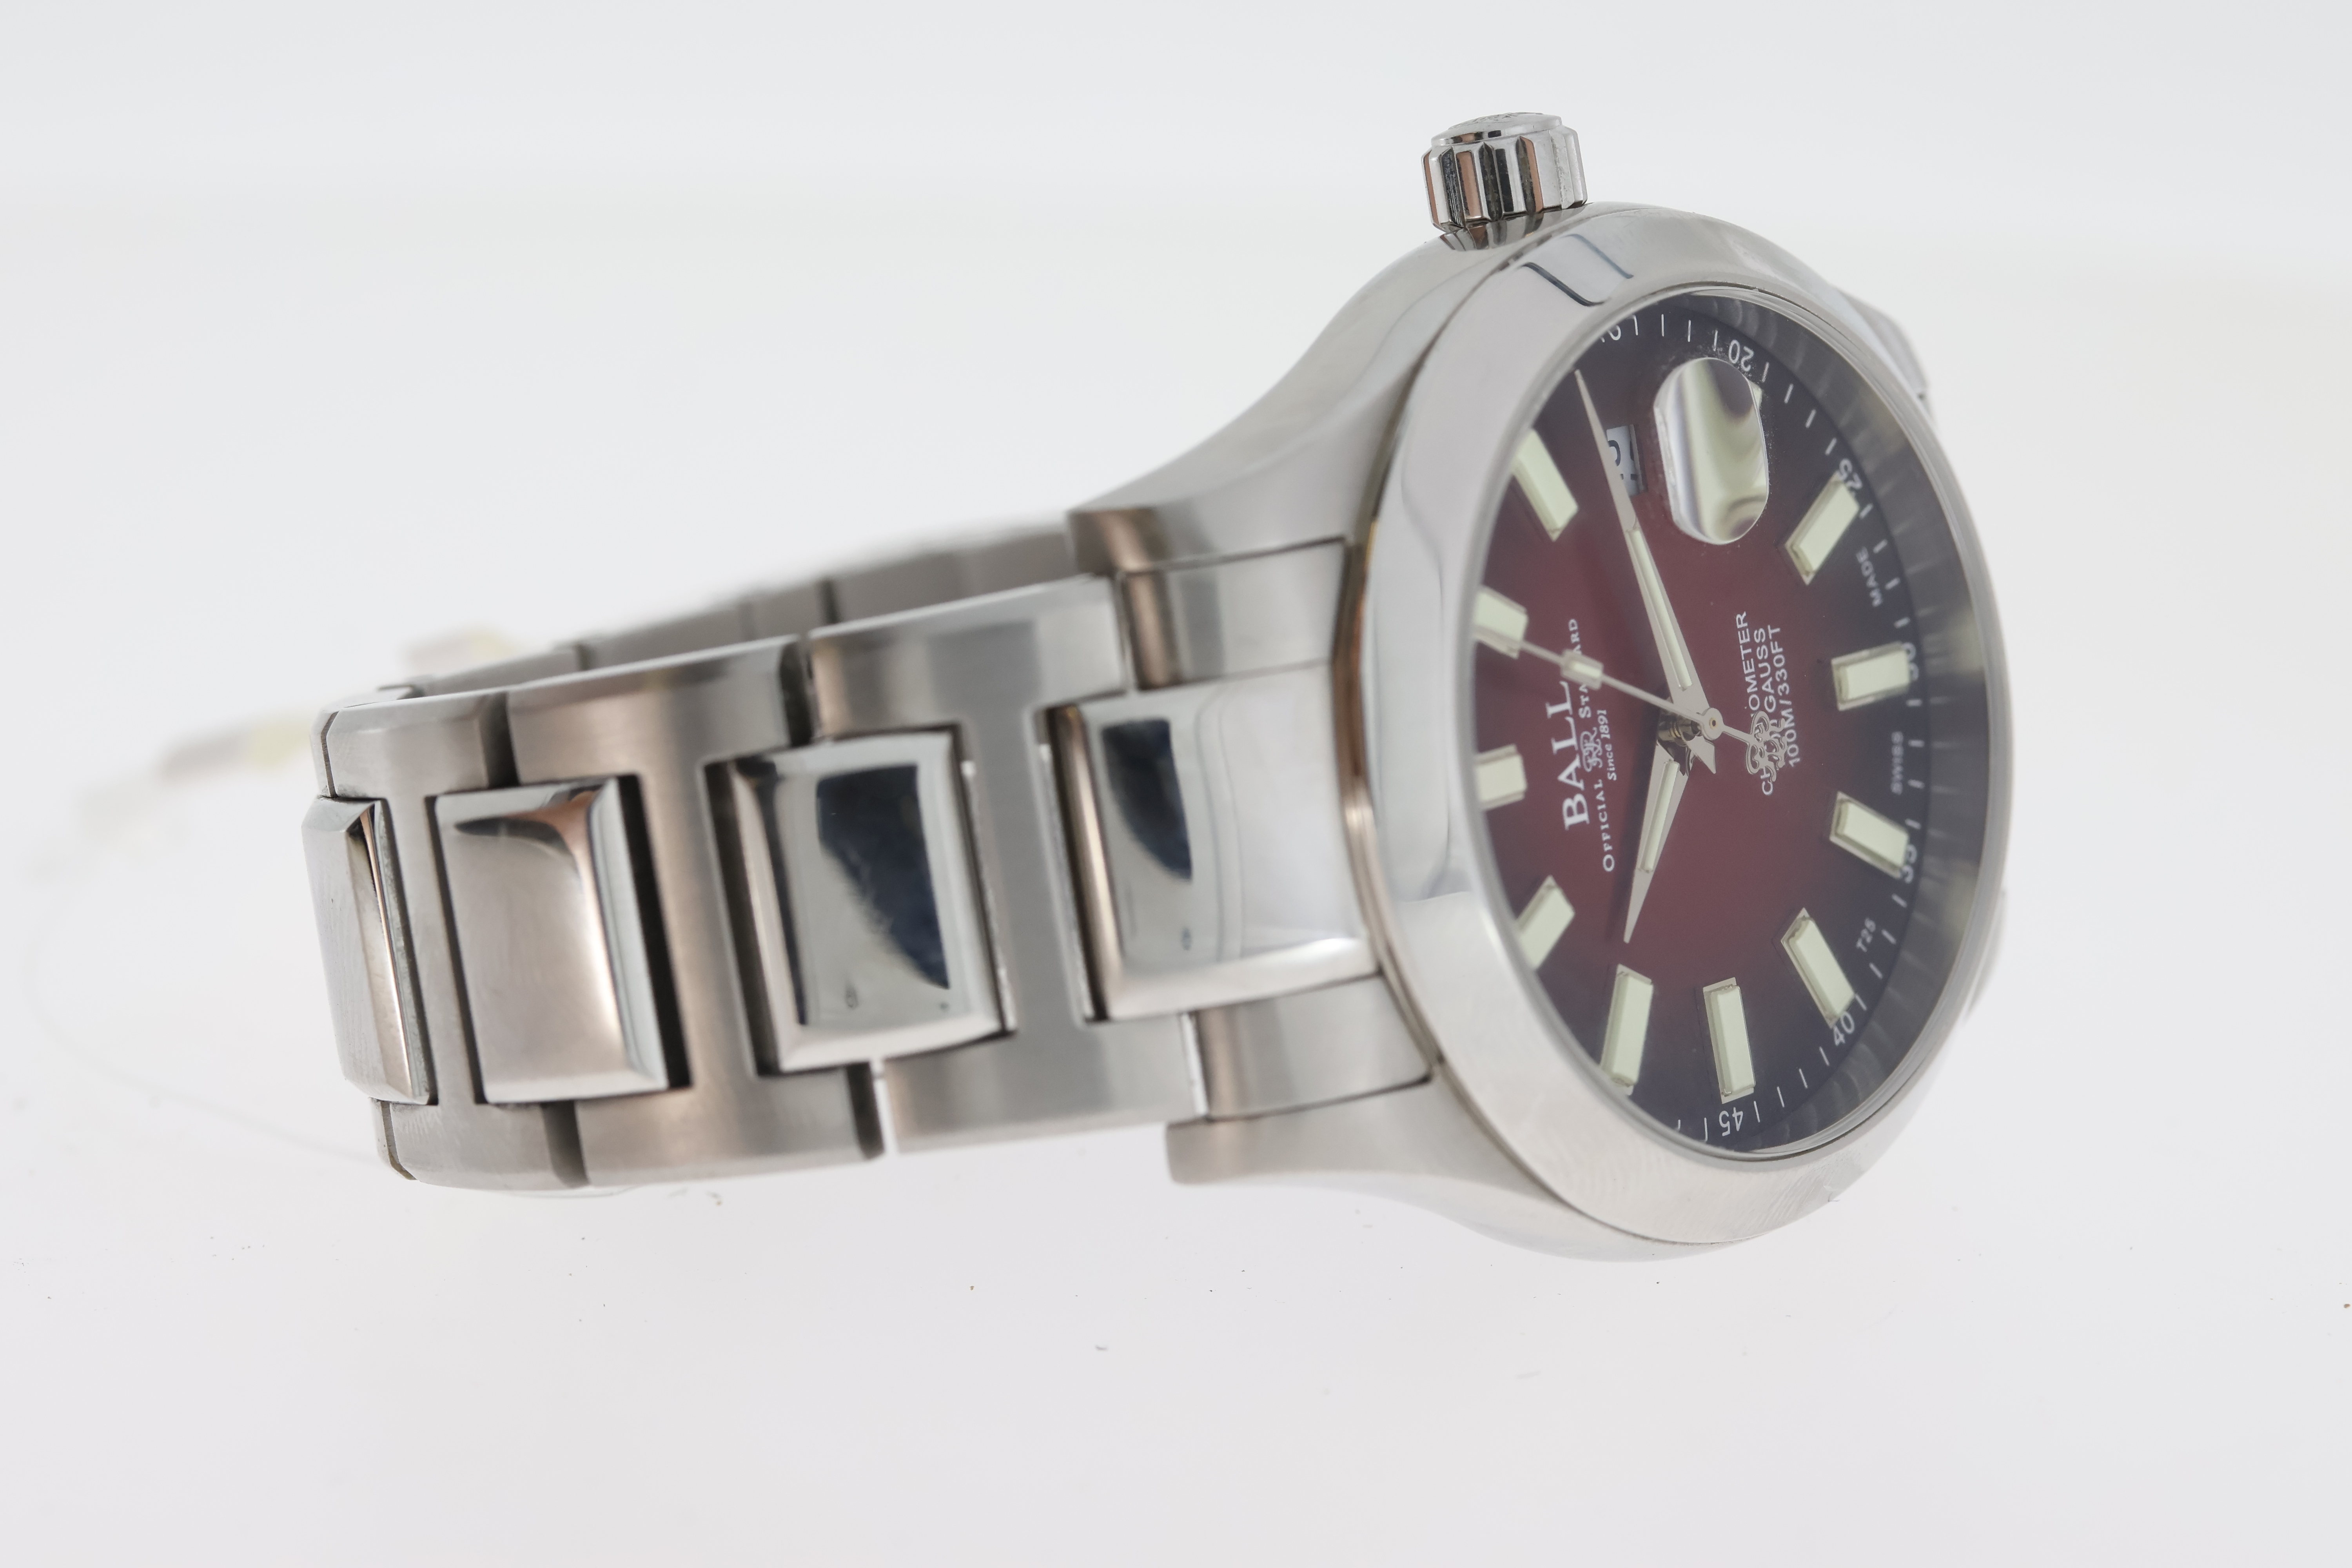 Ball Engineer III Maverlight Date Automatic with box and Papers - Image 4 of 6